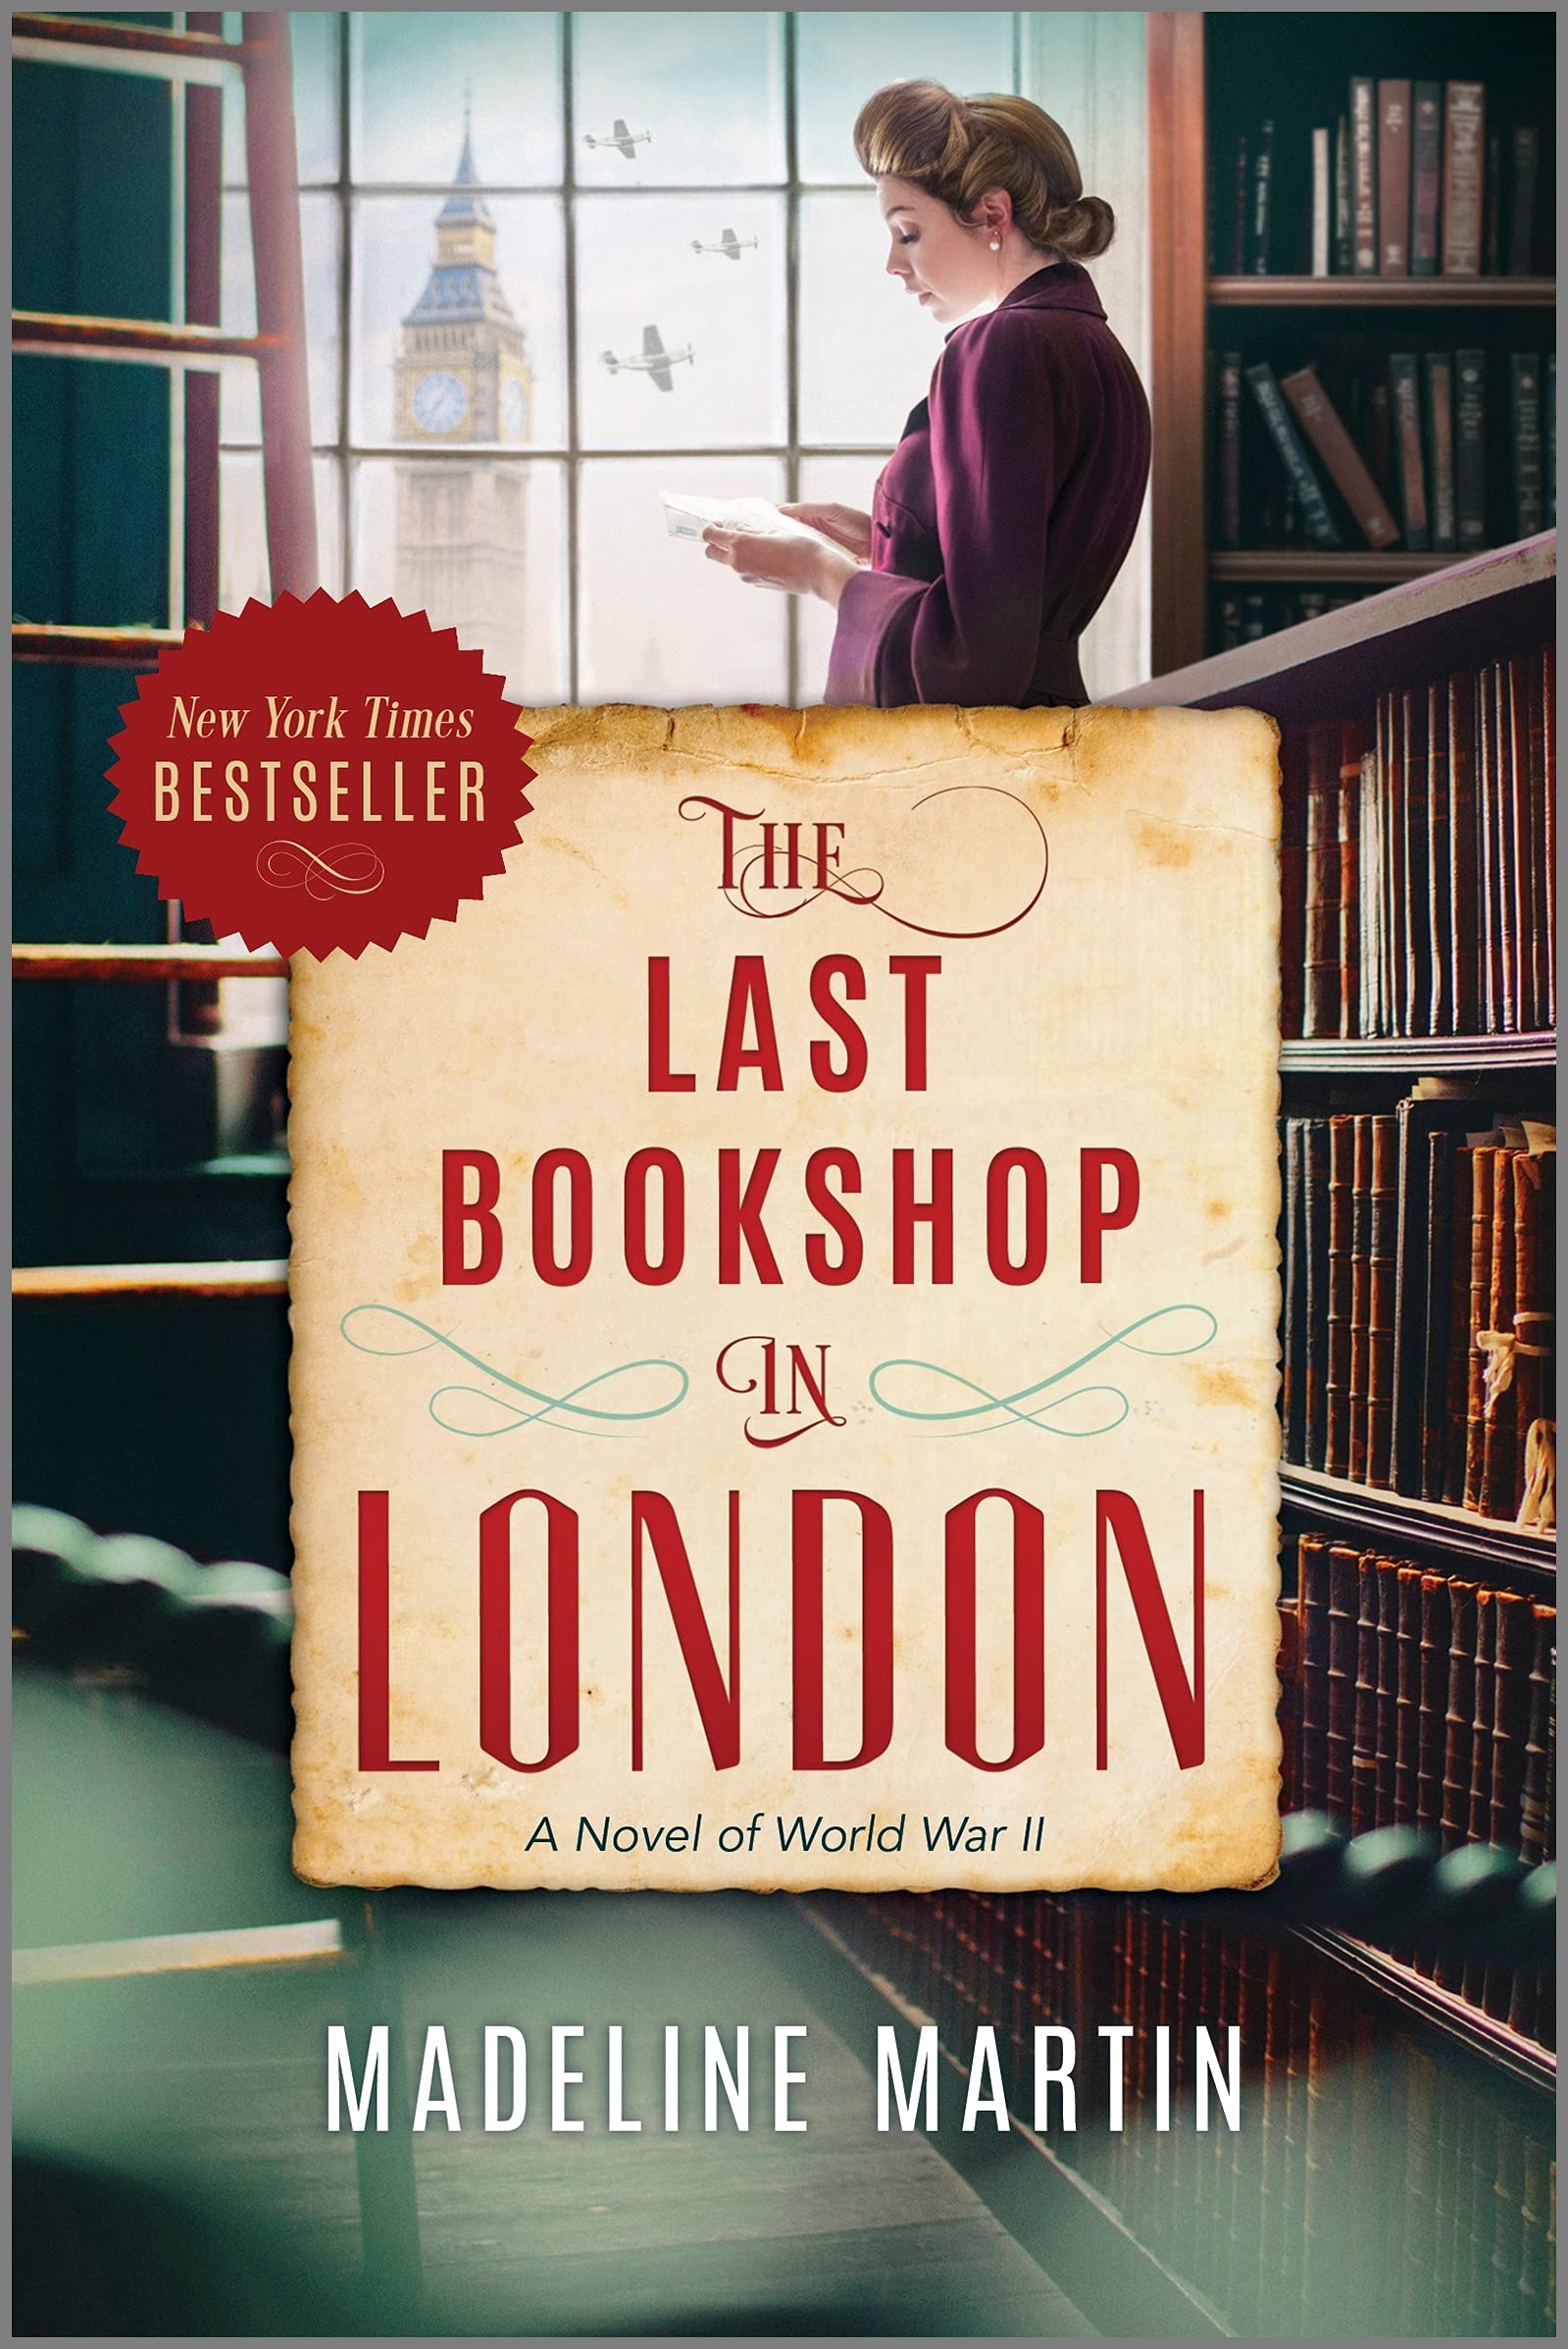 Cover Image for "The Last Bookshop in London"